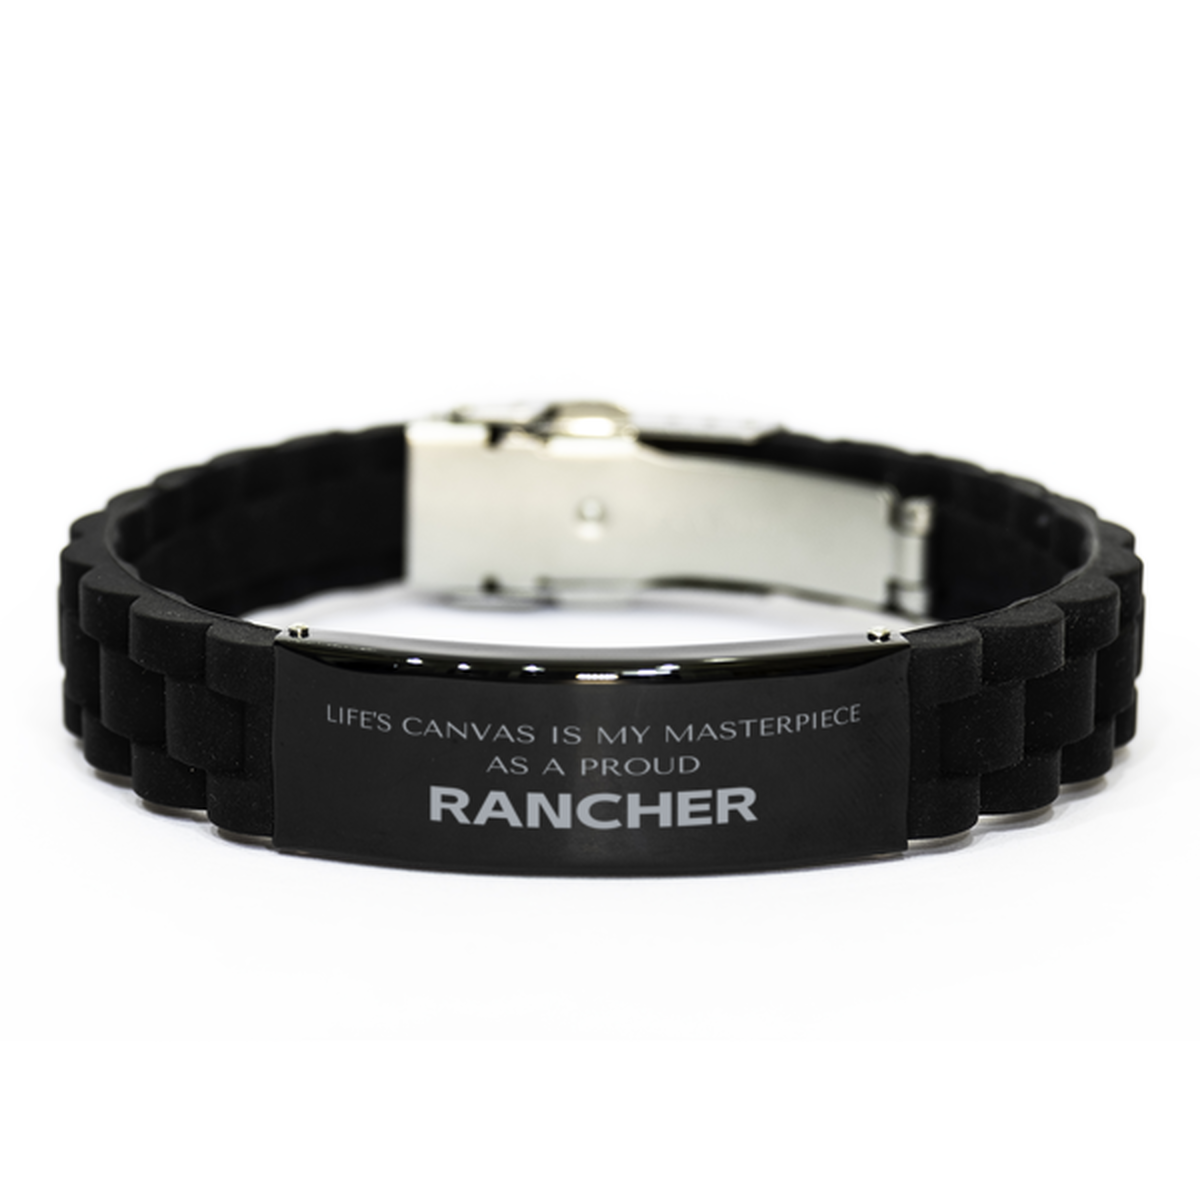 Proud Rancher Gifts, Life's canvas is my masterpiece, Epic Birthday Christmas Unique Black Glidelock Clasp Bracelet For Rancher, Coworkers, Men, Women, Friends